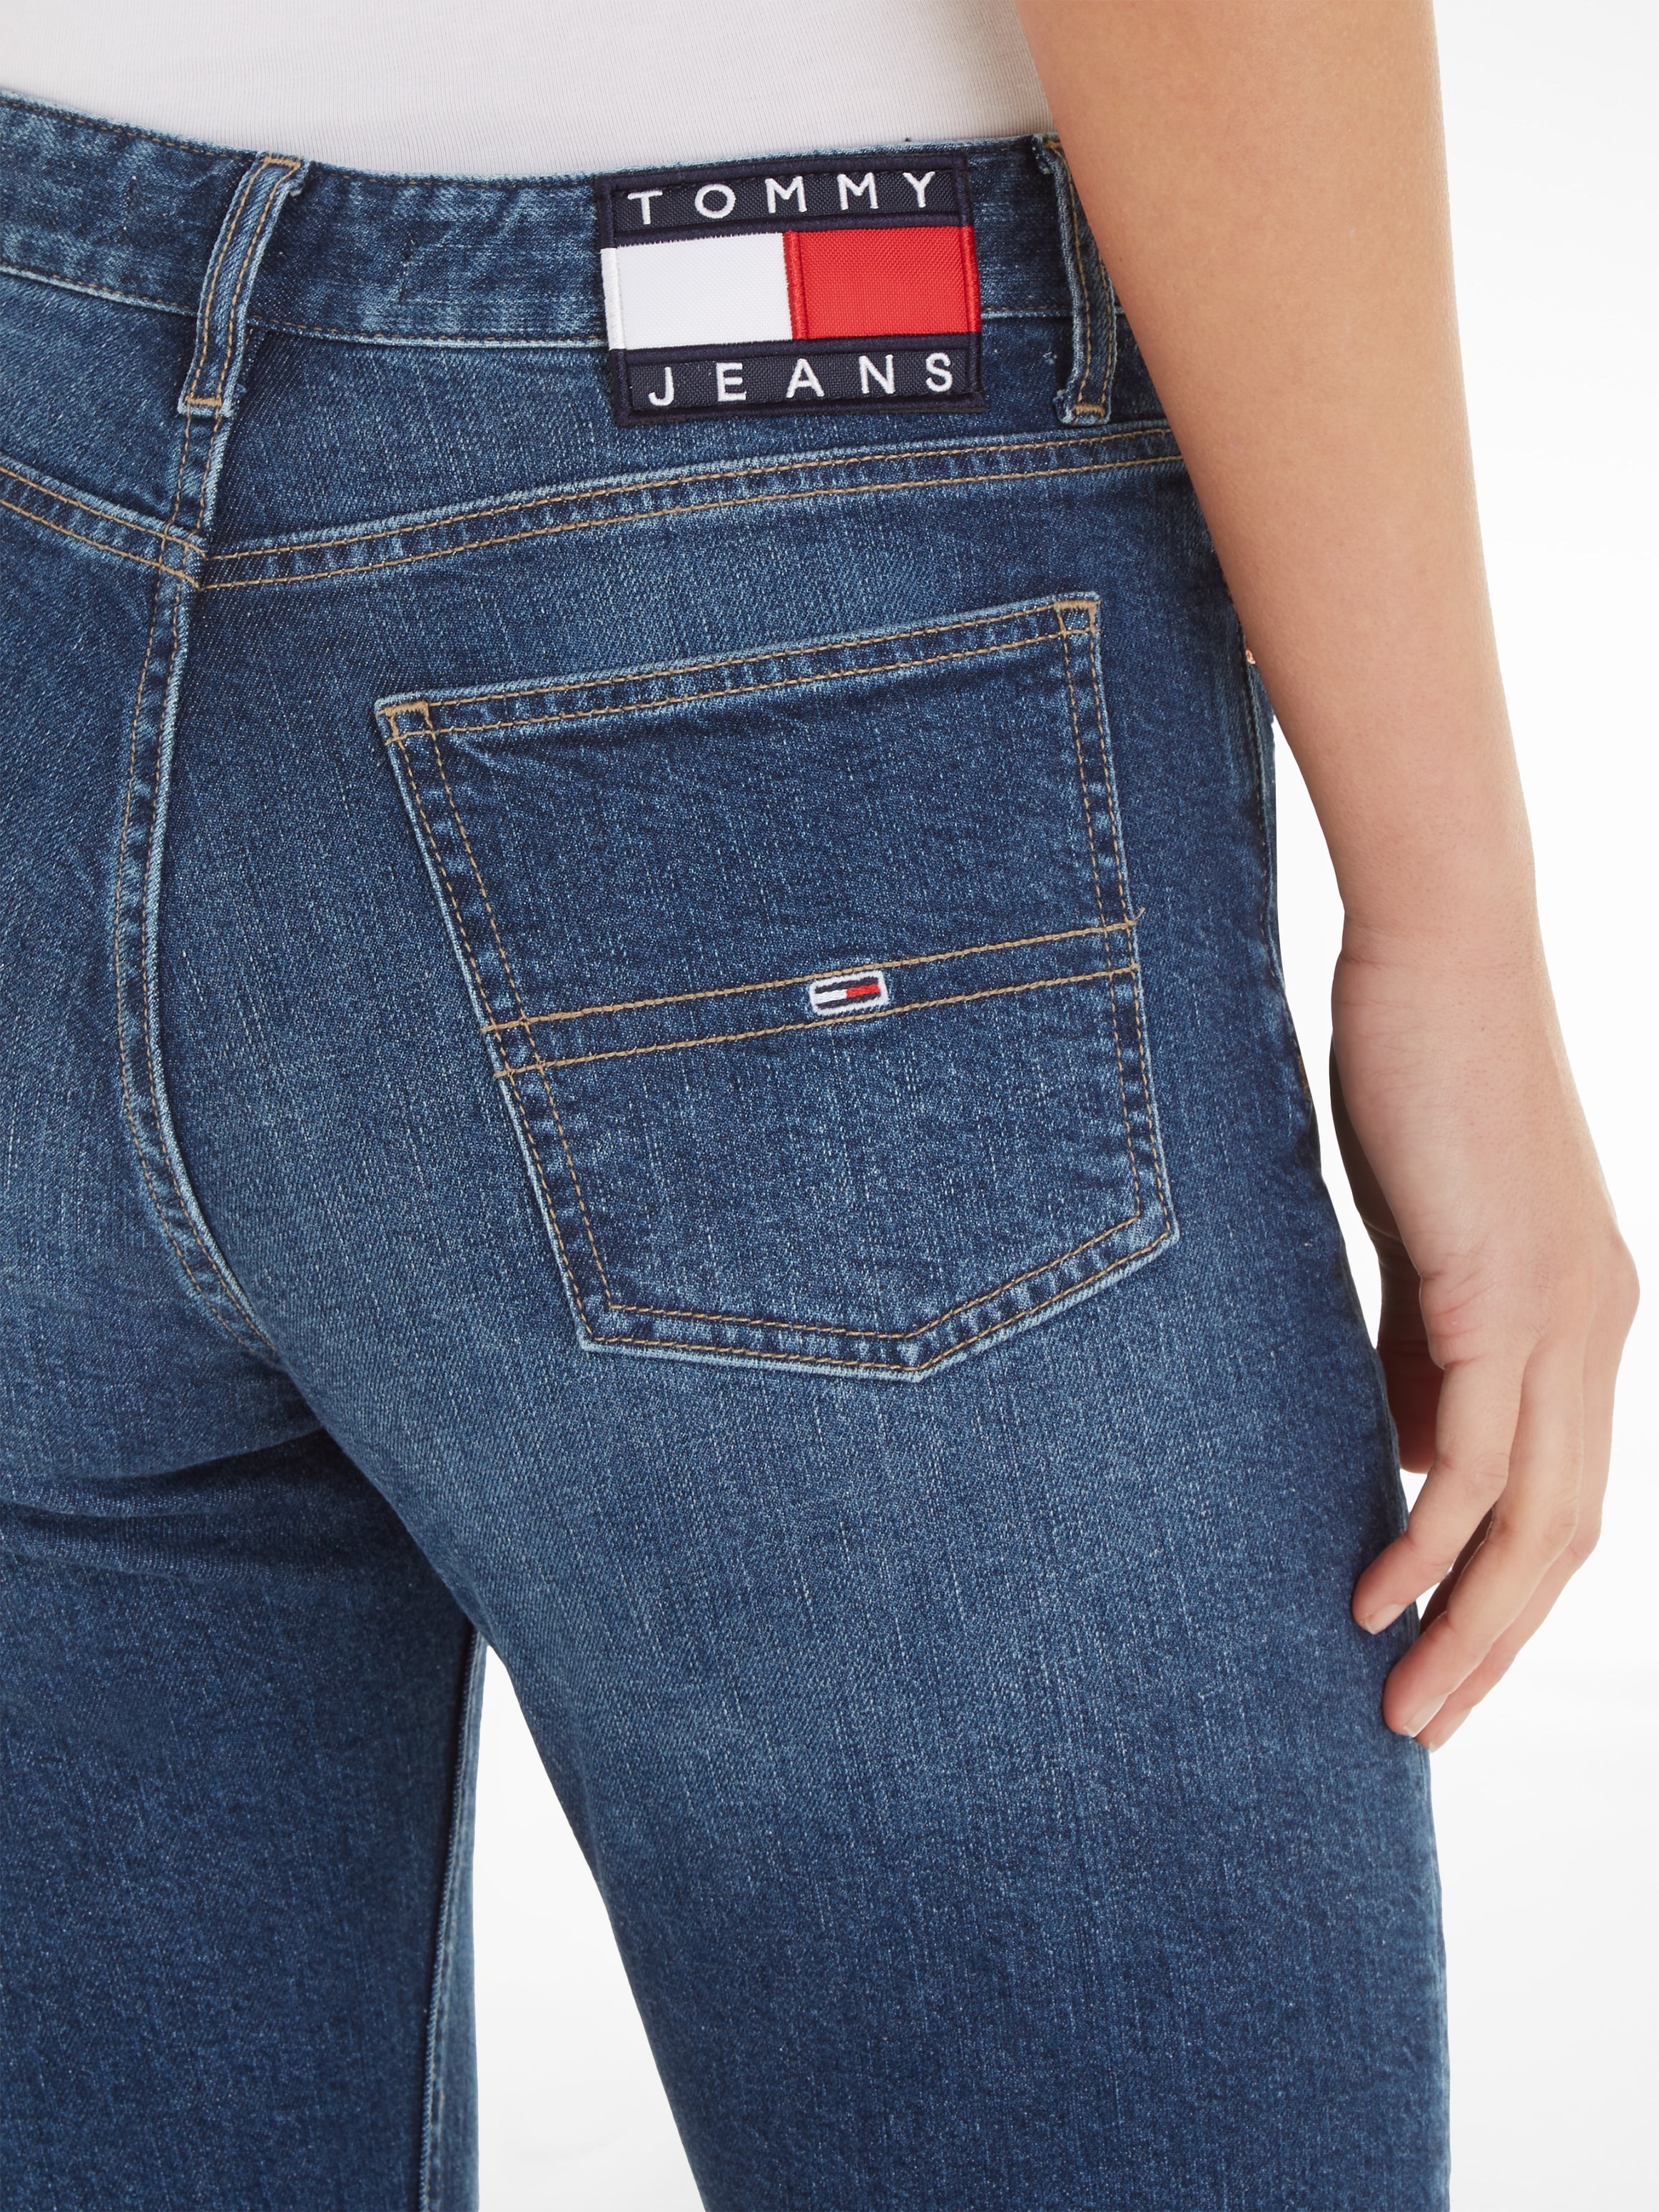 mit SL HR bei ANK CG4139«, Slim-fit-Jeans Jeans Logo-Badge OTTOversand Tommy Tommy »IZZIE